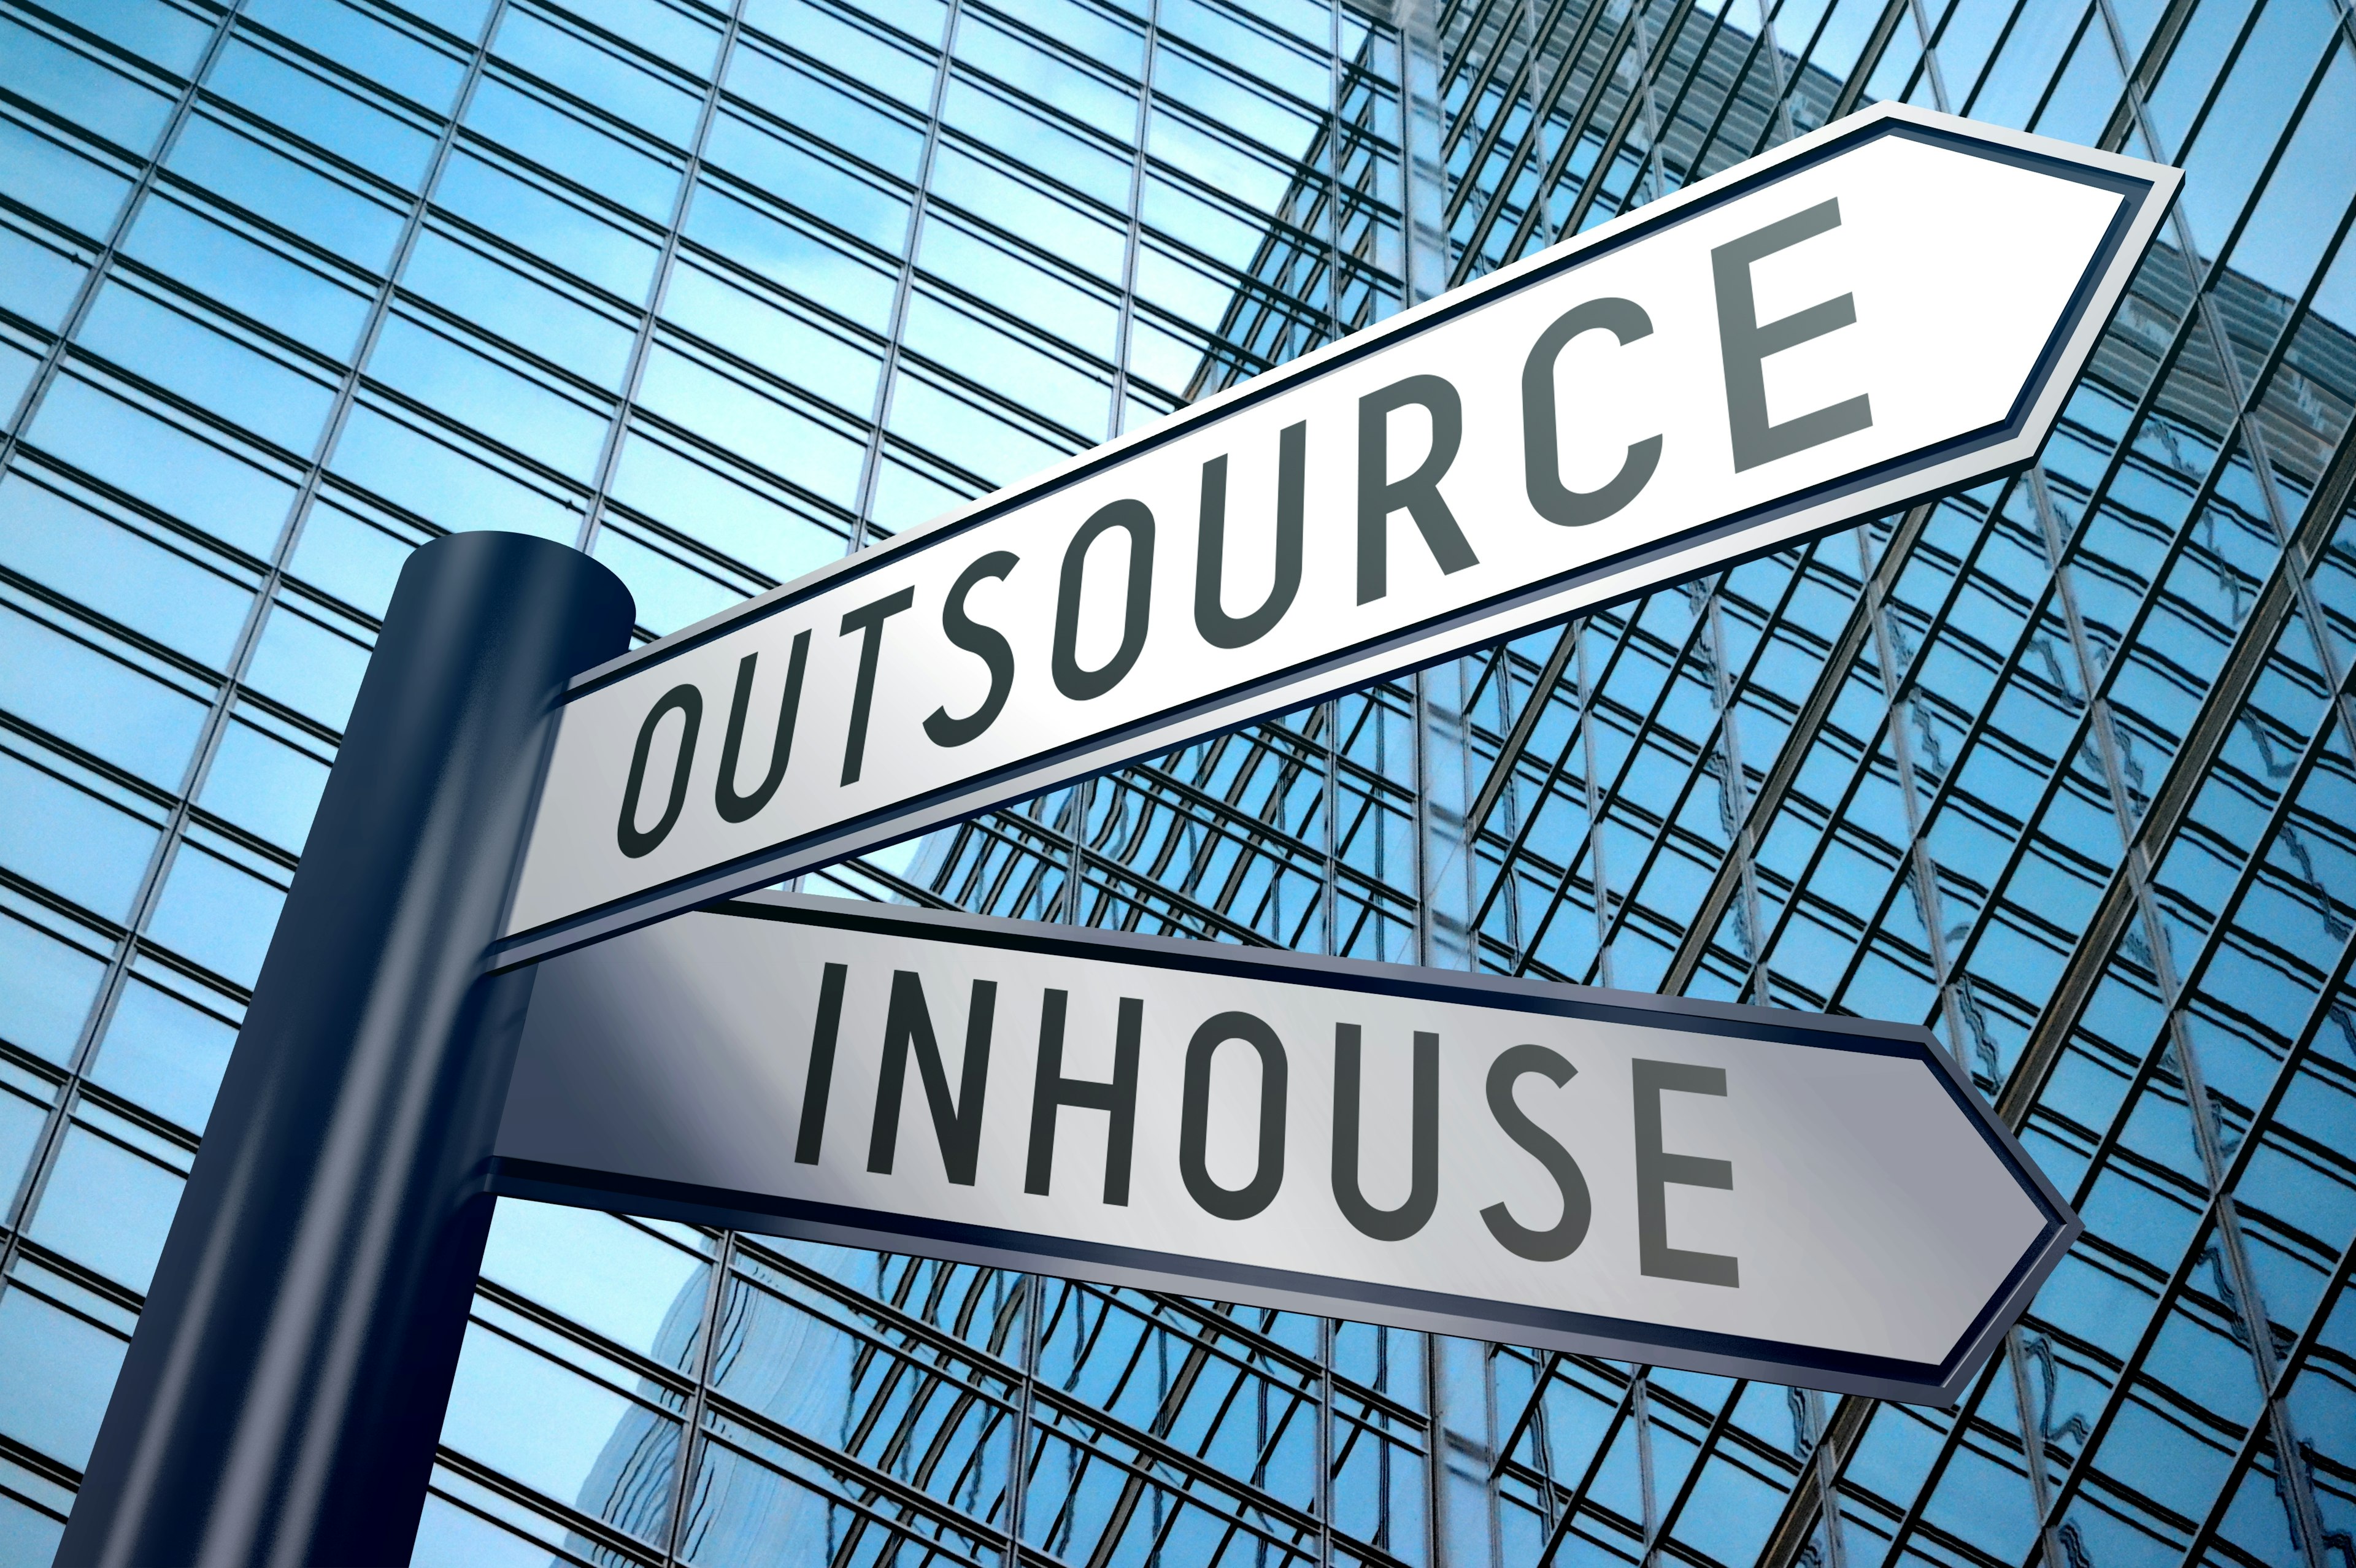 Over the course of the last two decades, the outsourcing of software development has steadily grown, having become a very viable option for business growth. Outsourcing allows your company to continue to focus on its core competencies, and eliminates the upfront investment in hiring and developing a software development unit.